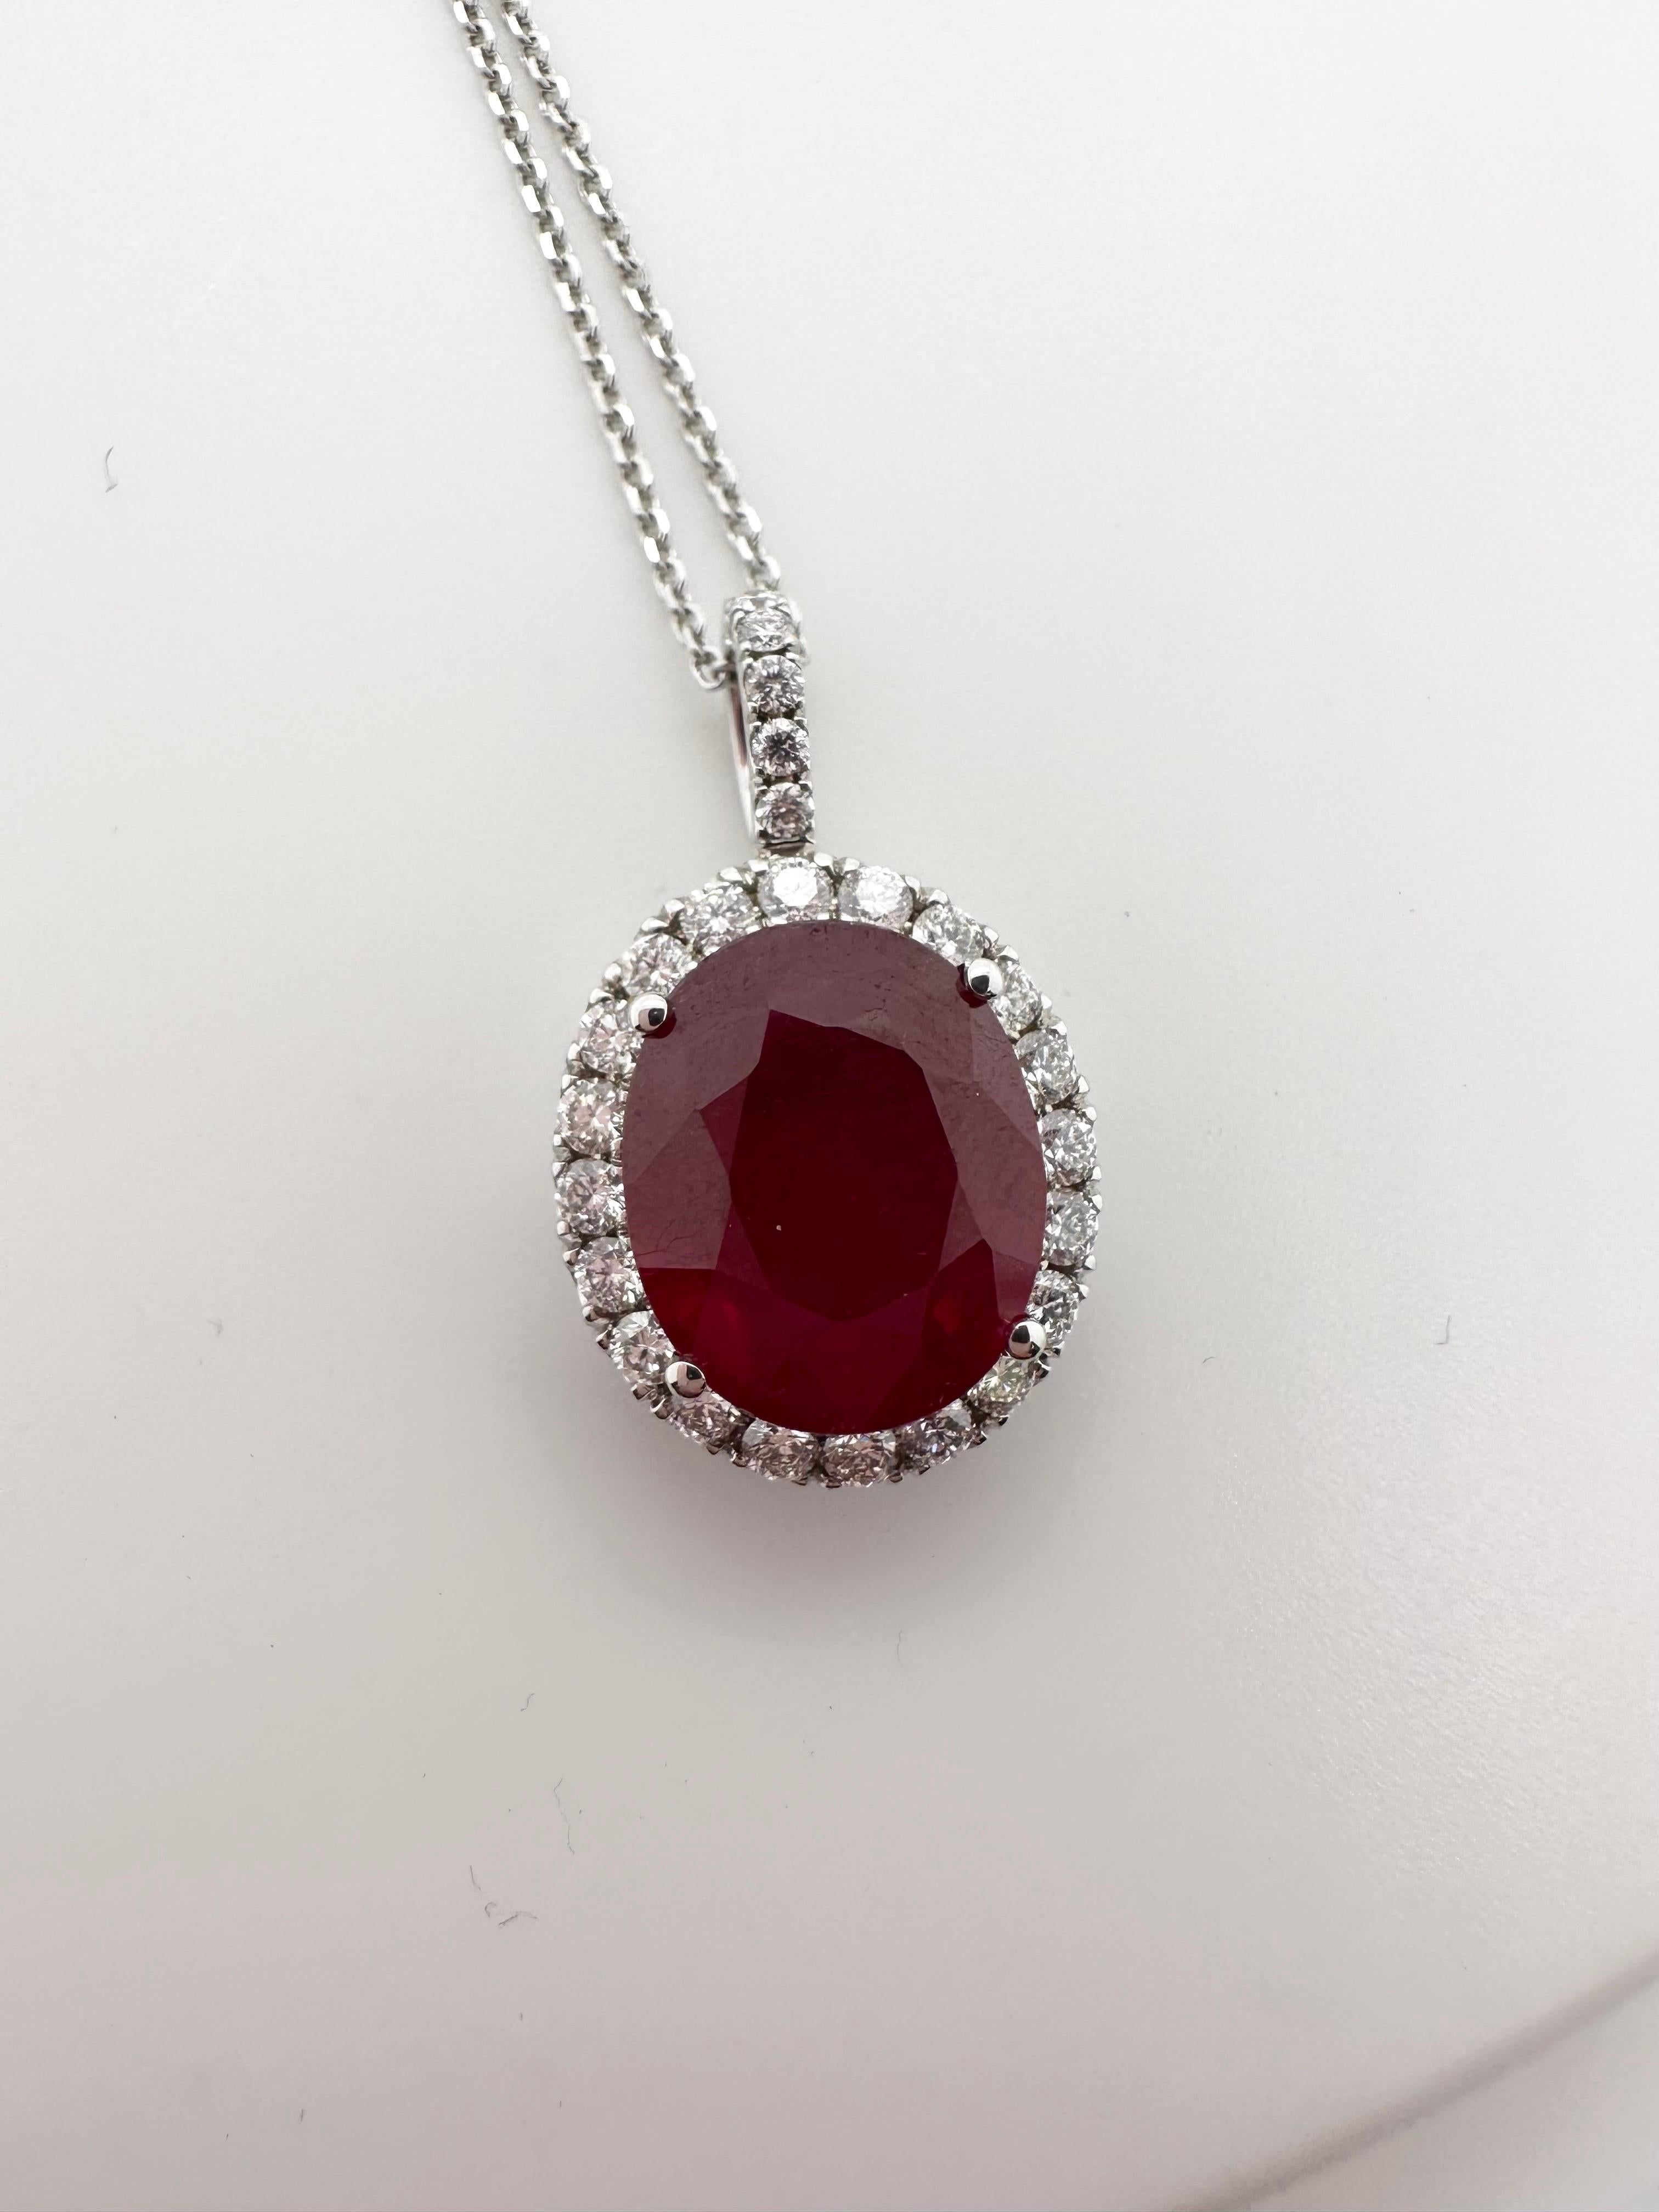 Ruby pendant necklace made in 18Kt white gold, chain is 18 inches. Ruby is a stunning red color, 100% natural but enhanced. 

Metal Type: 14KT
Rubies:7.15ct ct approximately (natural but enhanced)
Natural Diamond(s): 
Color: F-G-H
Cut:Round